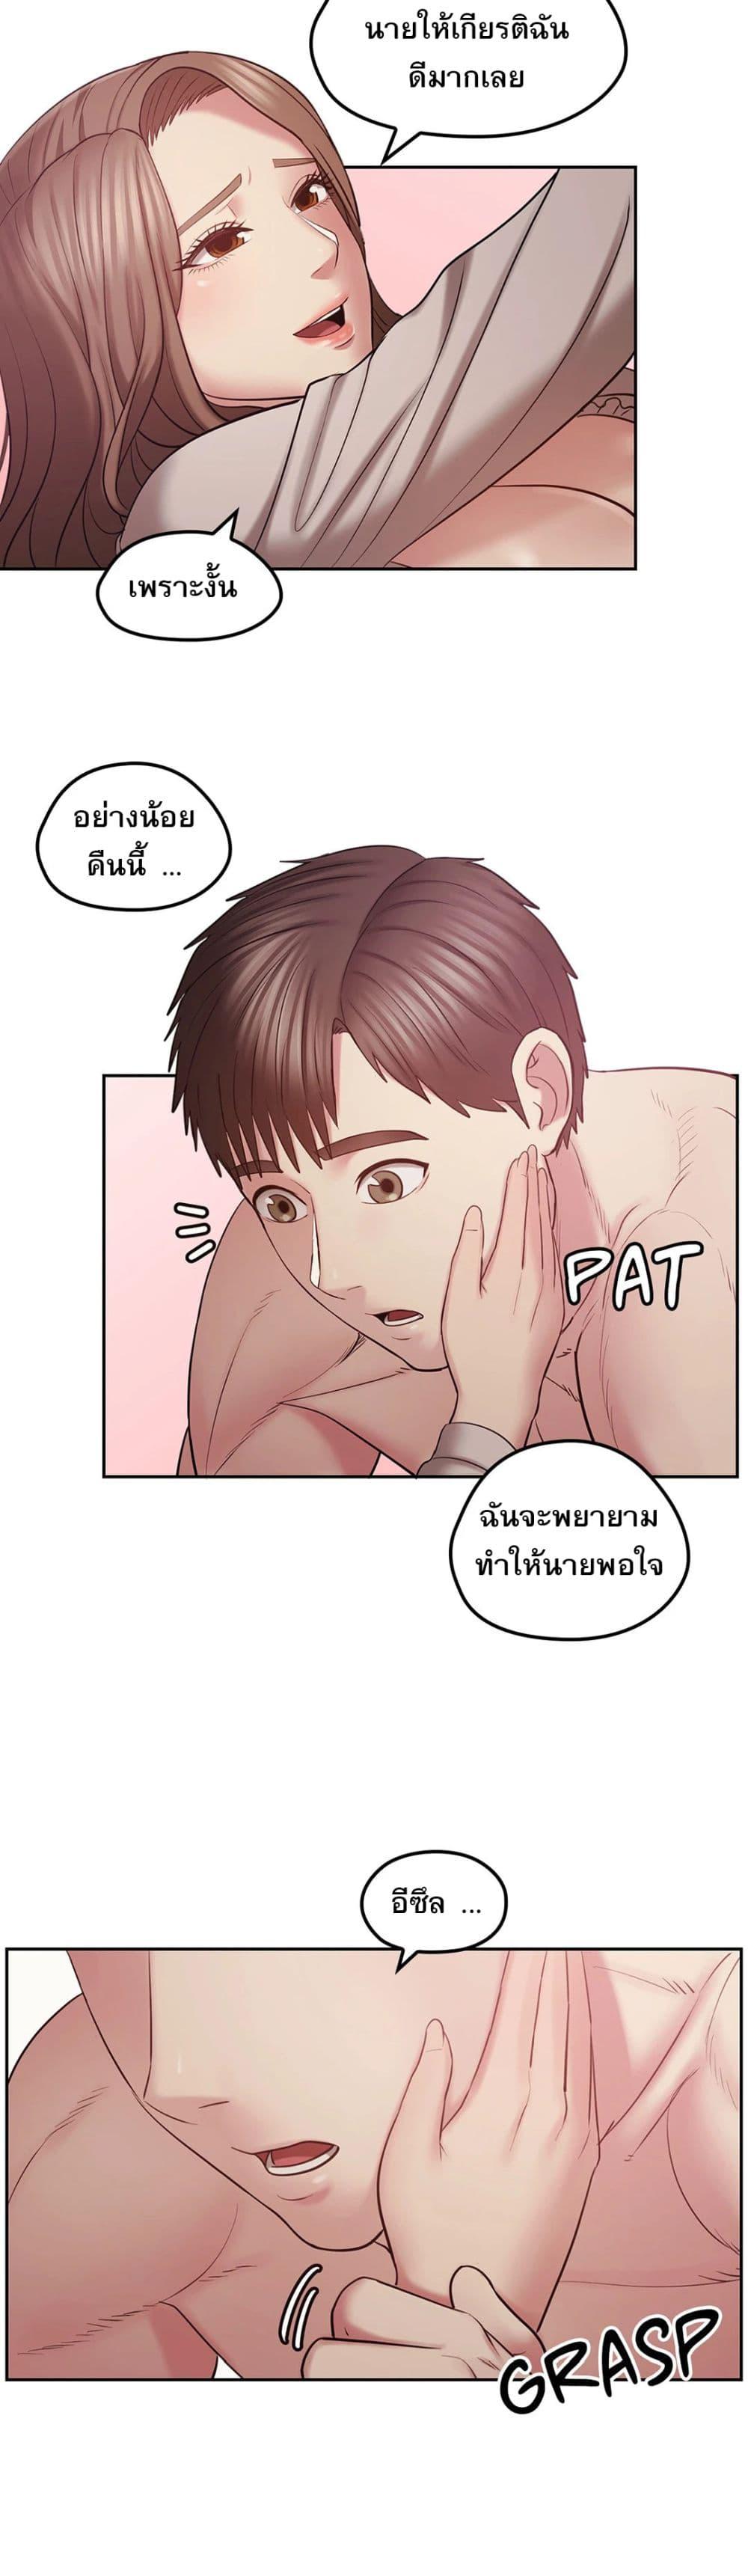 Sexual Consulting 1 ภาพ 39